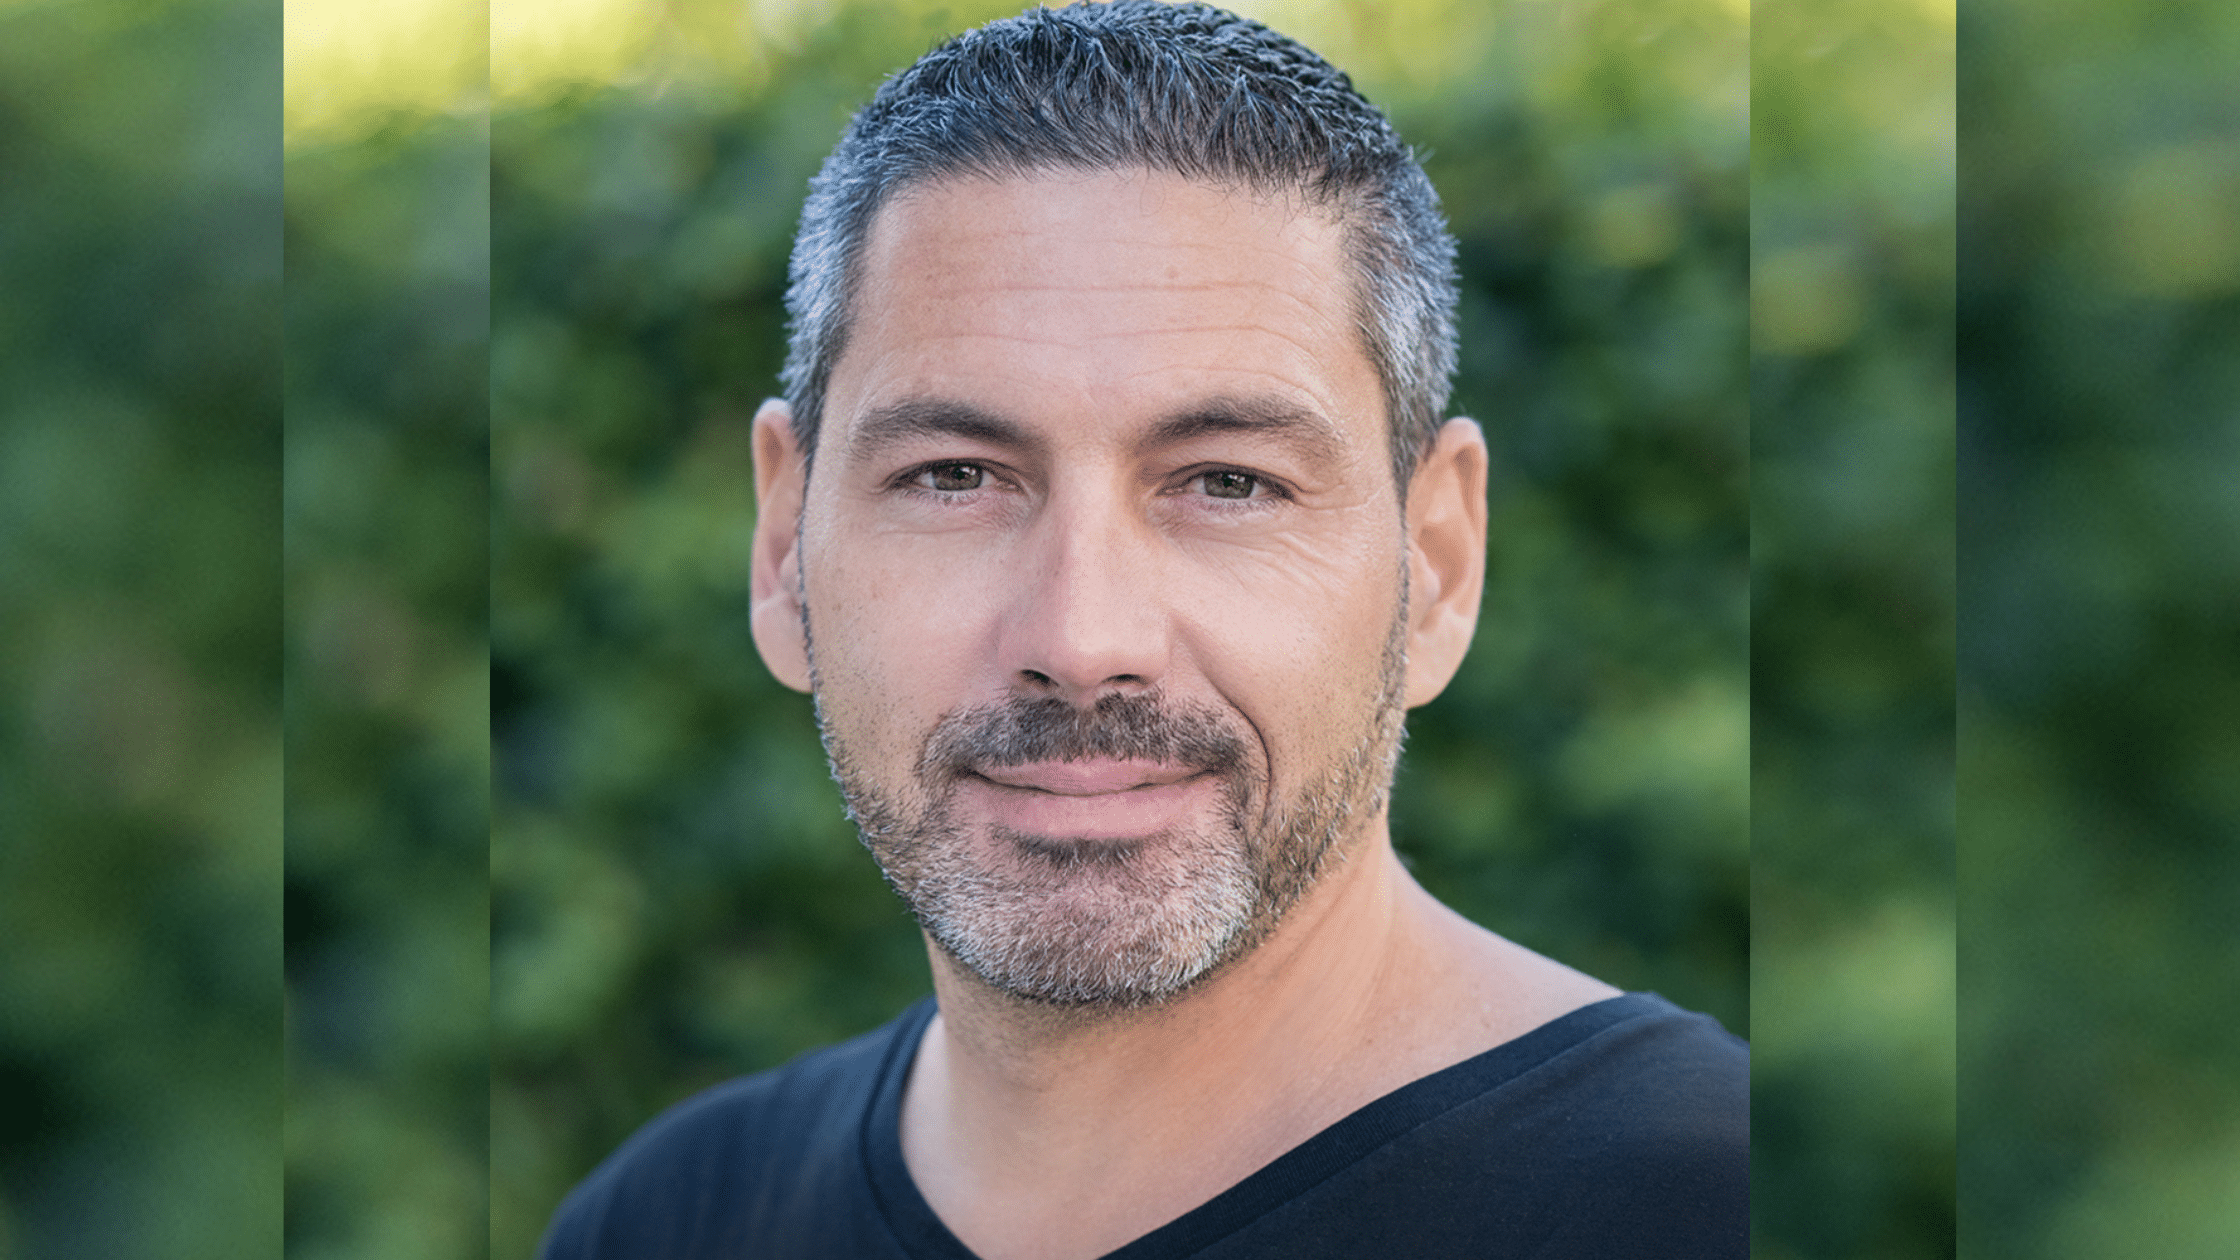 AEye’s Luis Dussan Named a 2022 Self-Driving Power Player by Business Insider